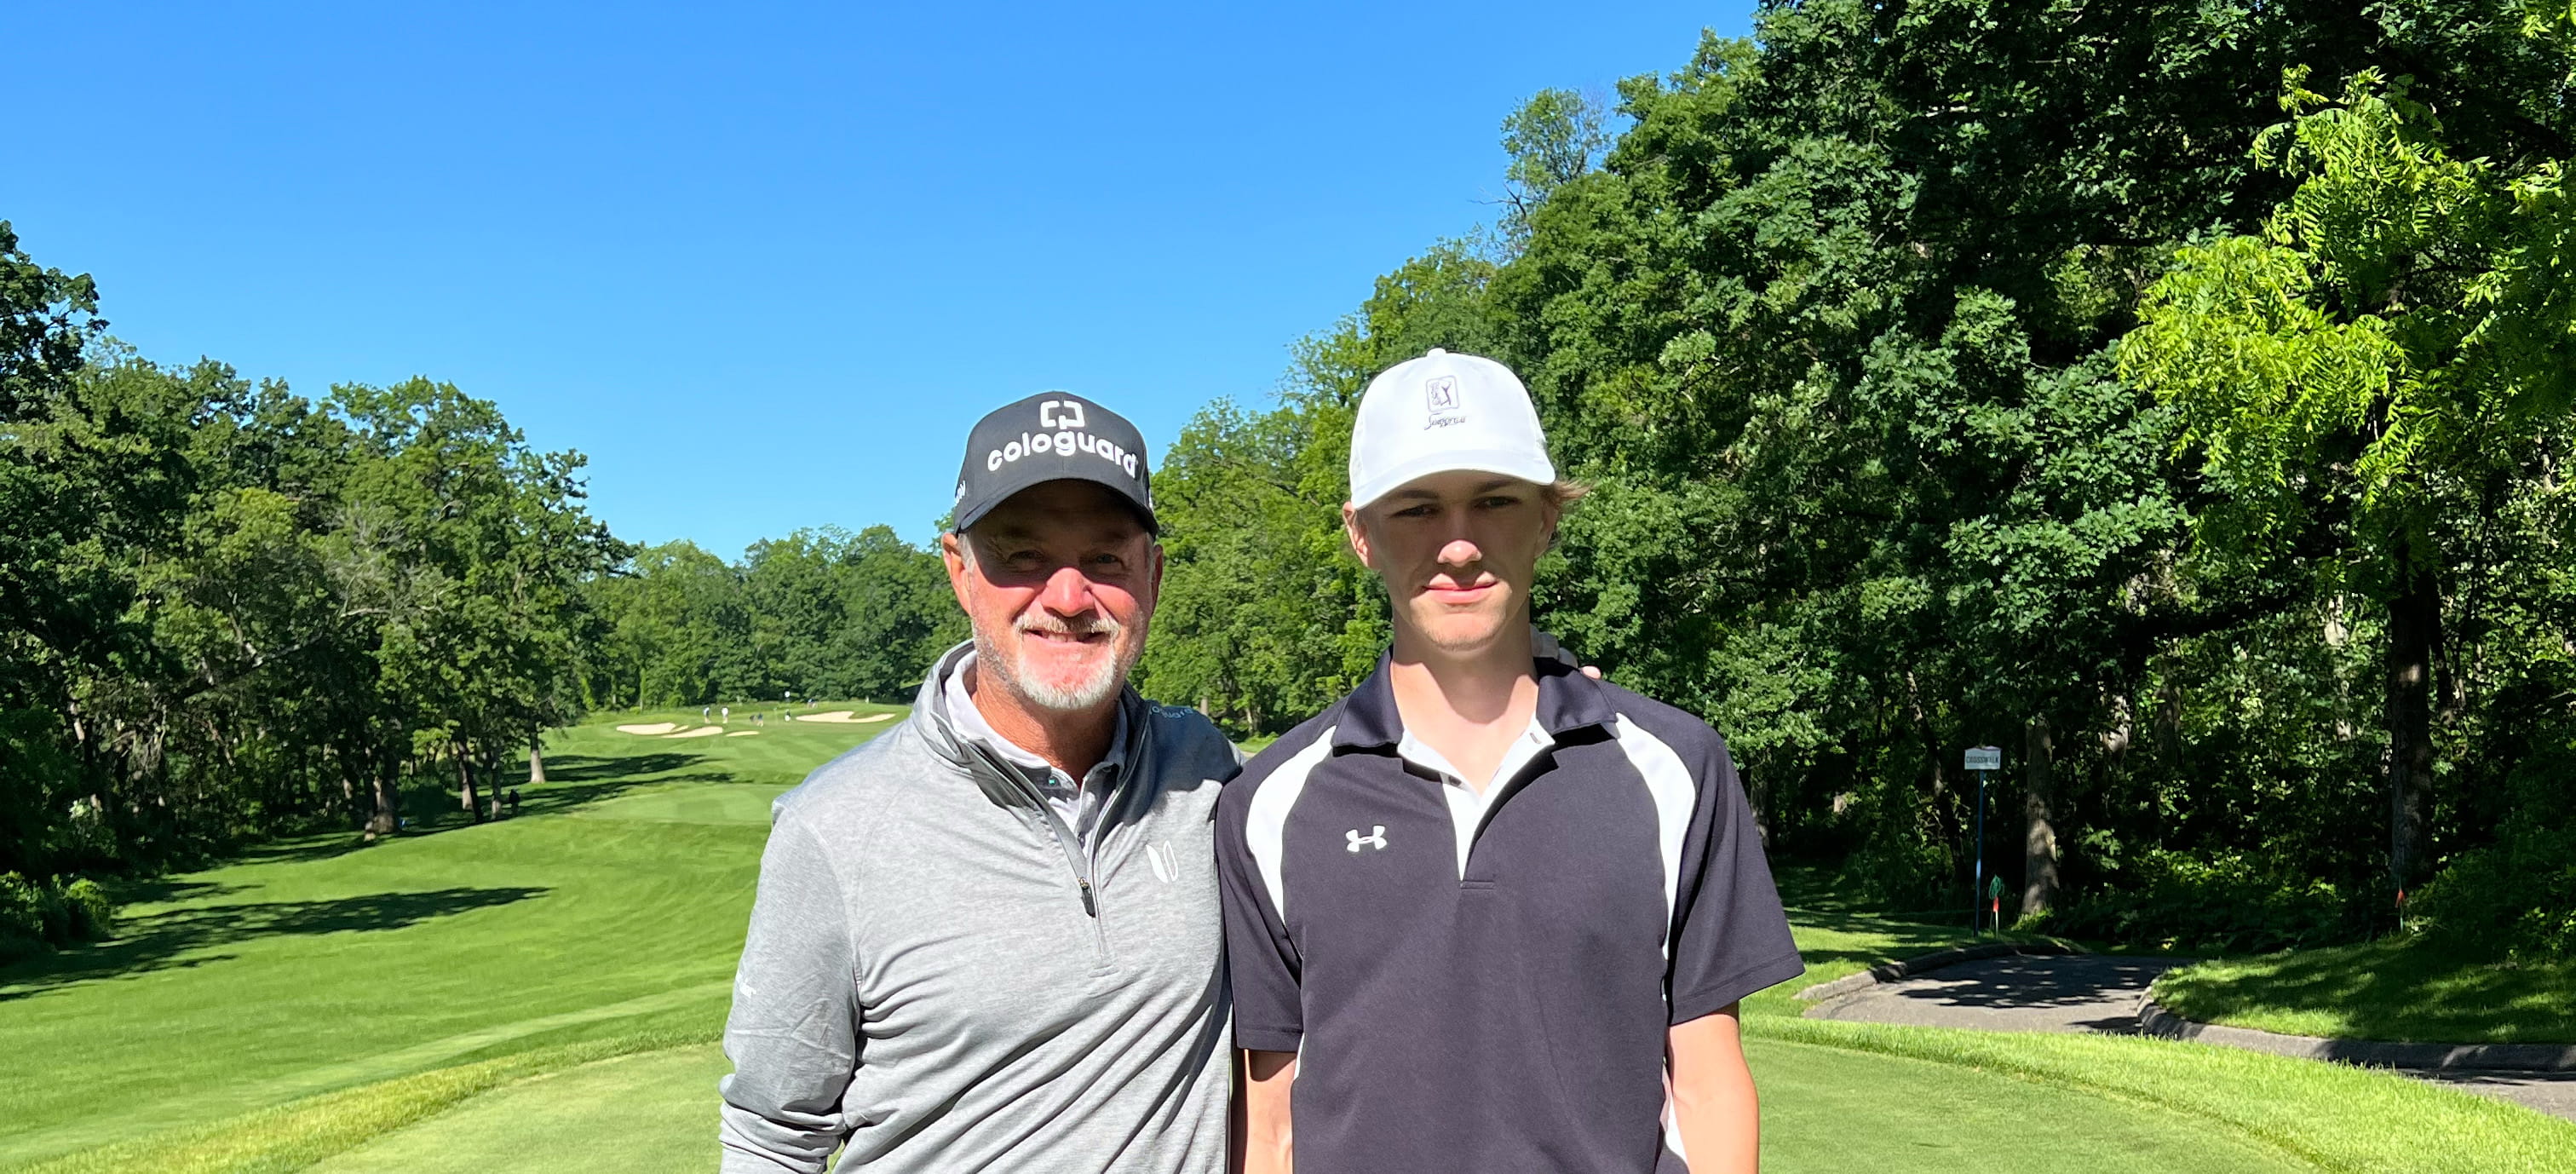 Pro golfer Jerry Kelly and young golfer at course